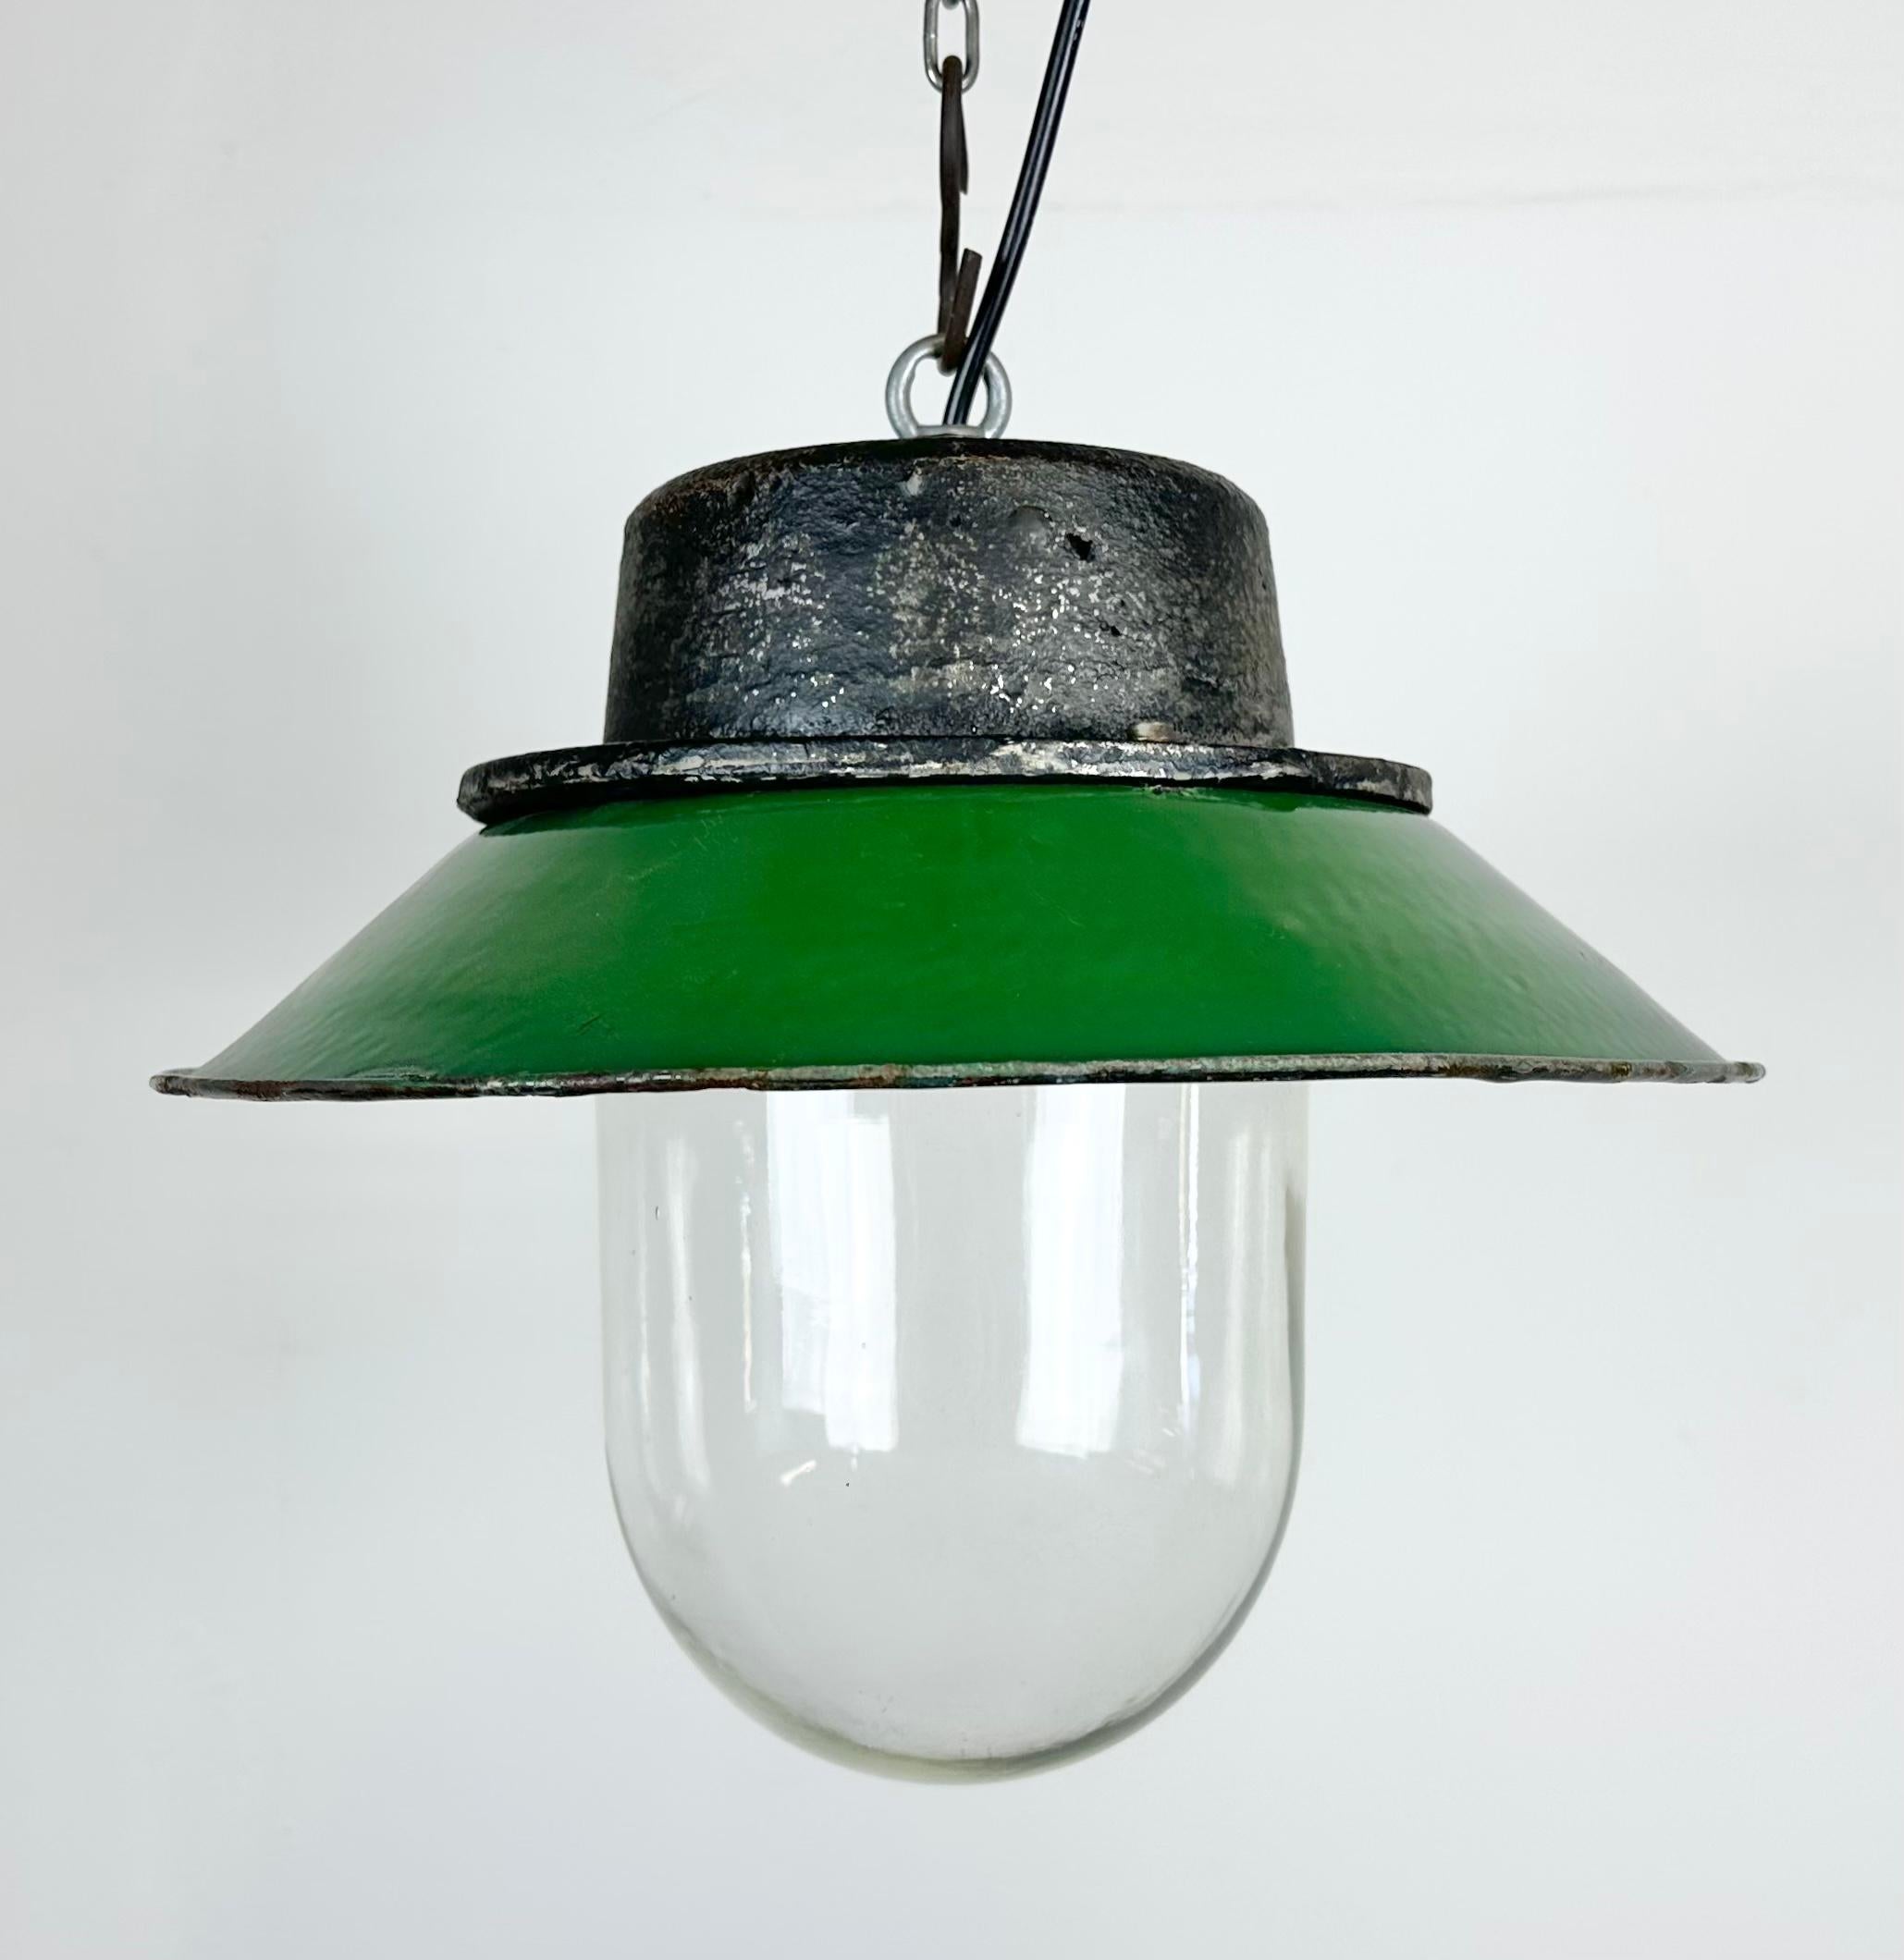 Polish Green Enamel and Cast Iron Industrial Pendant Light, 1960s For Sale